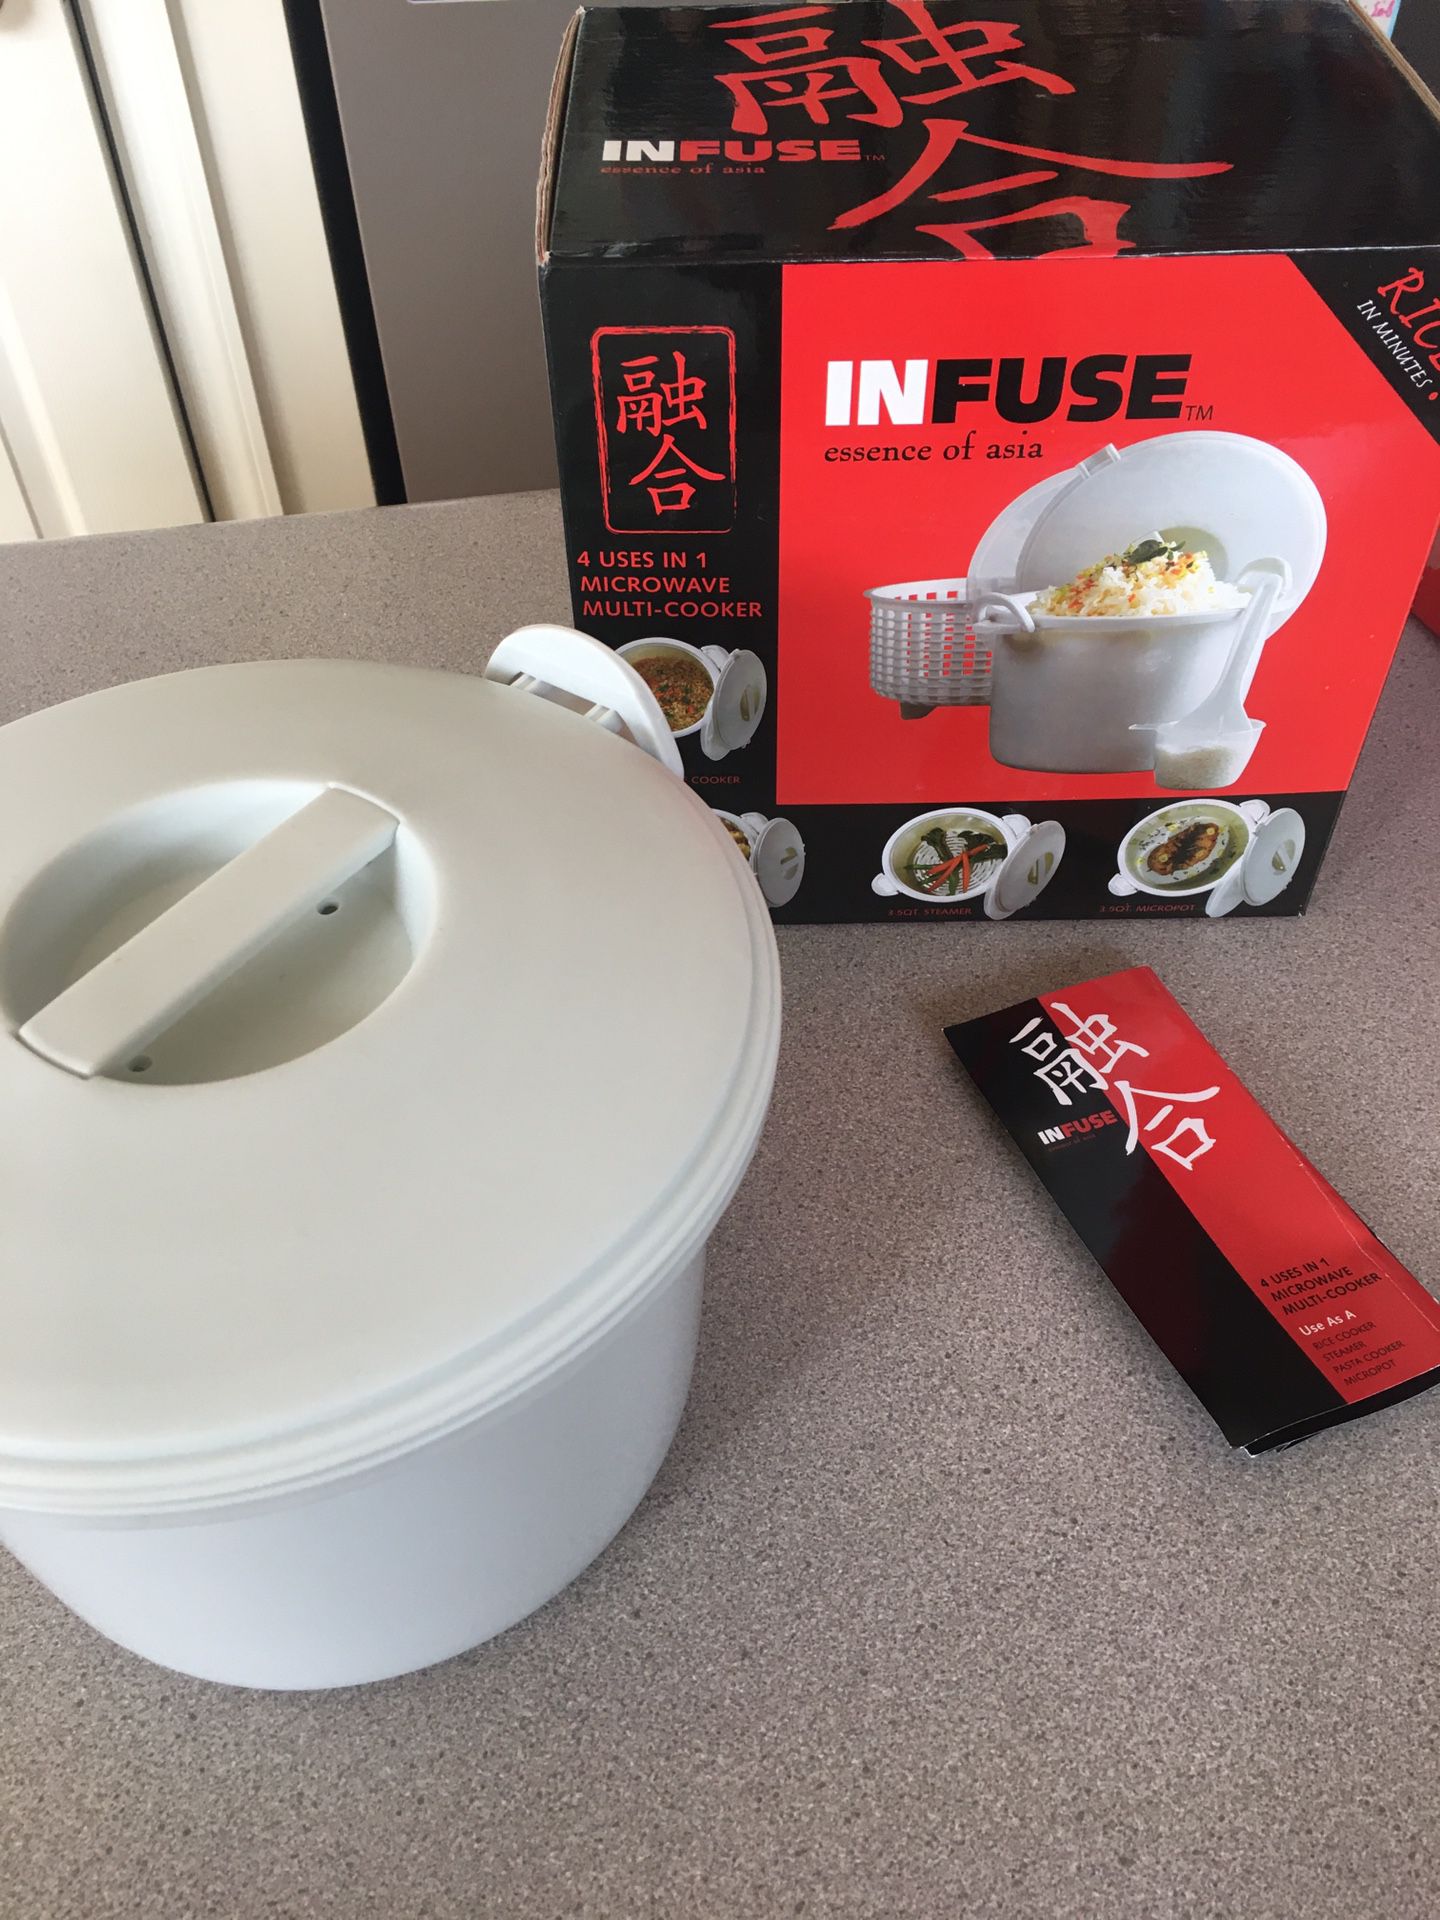 INFUSE 4 uses in 1 Microwave Multi-Cooker